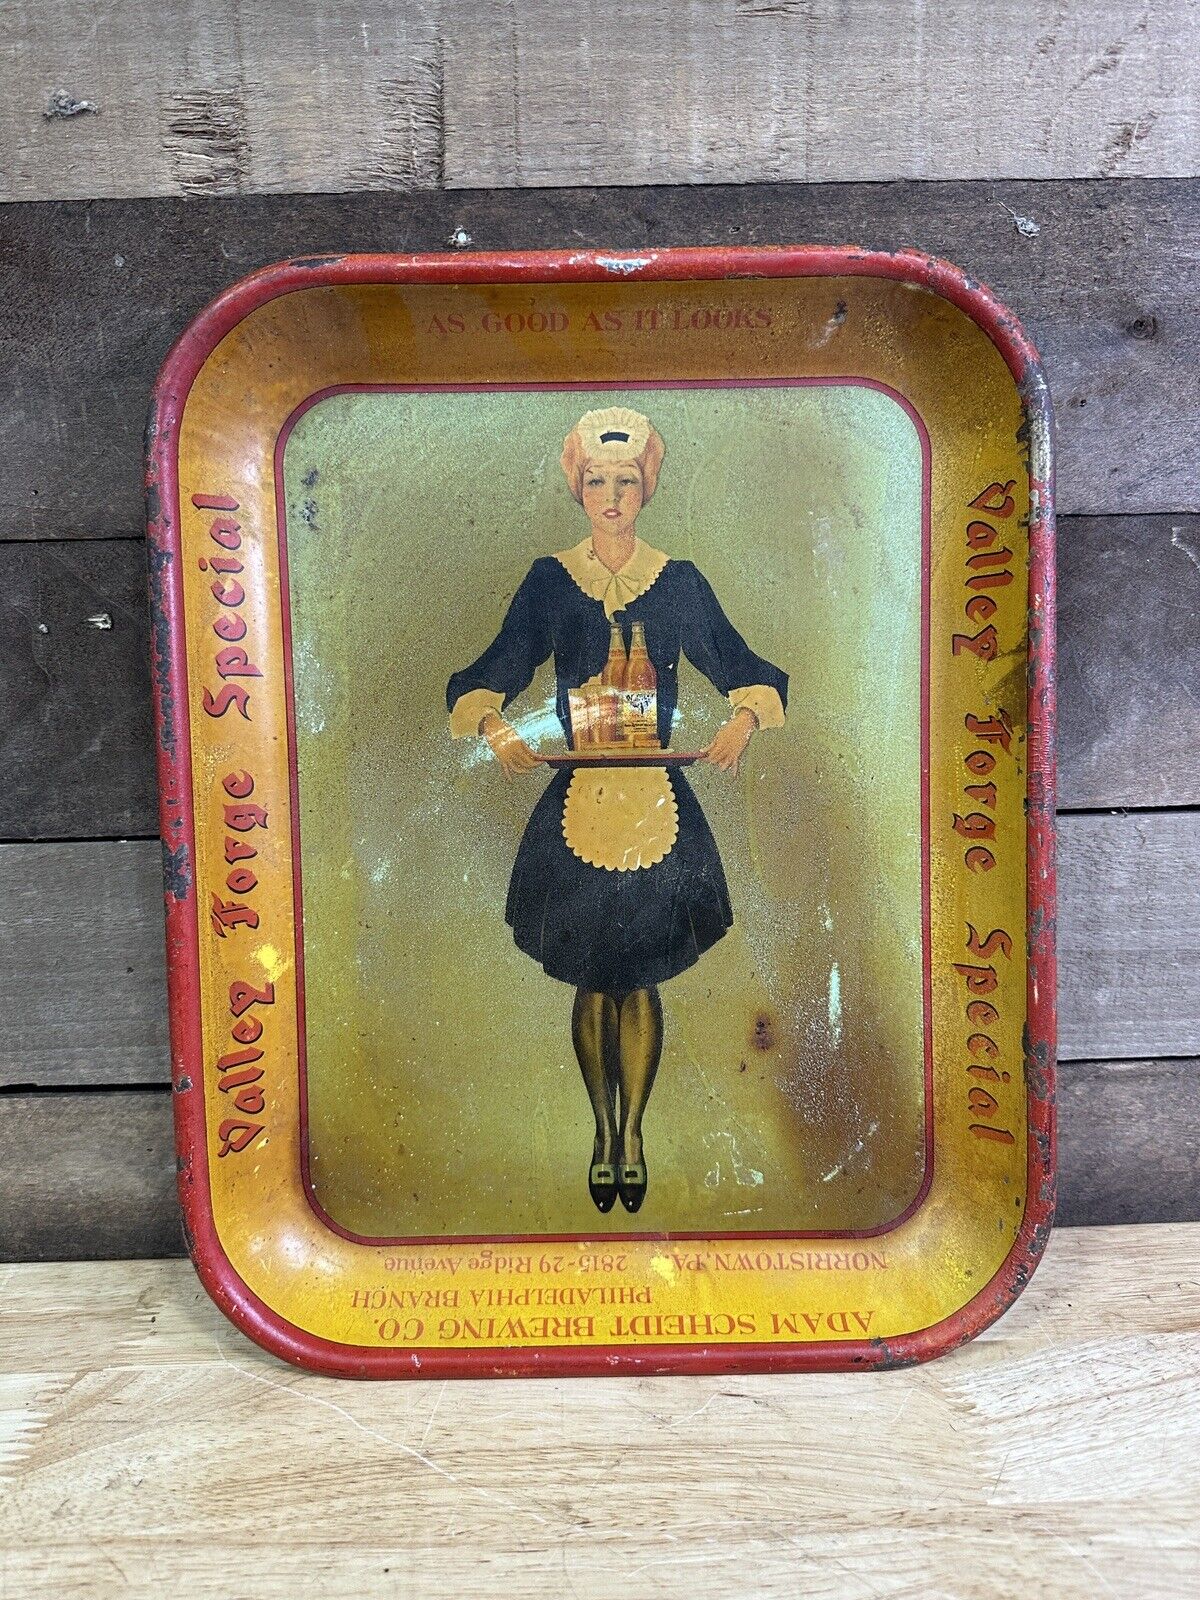 Vintage 1930s Valley Forge Special Beer Serving Tray